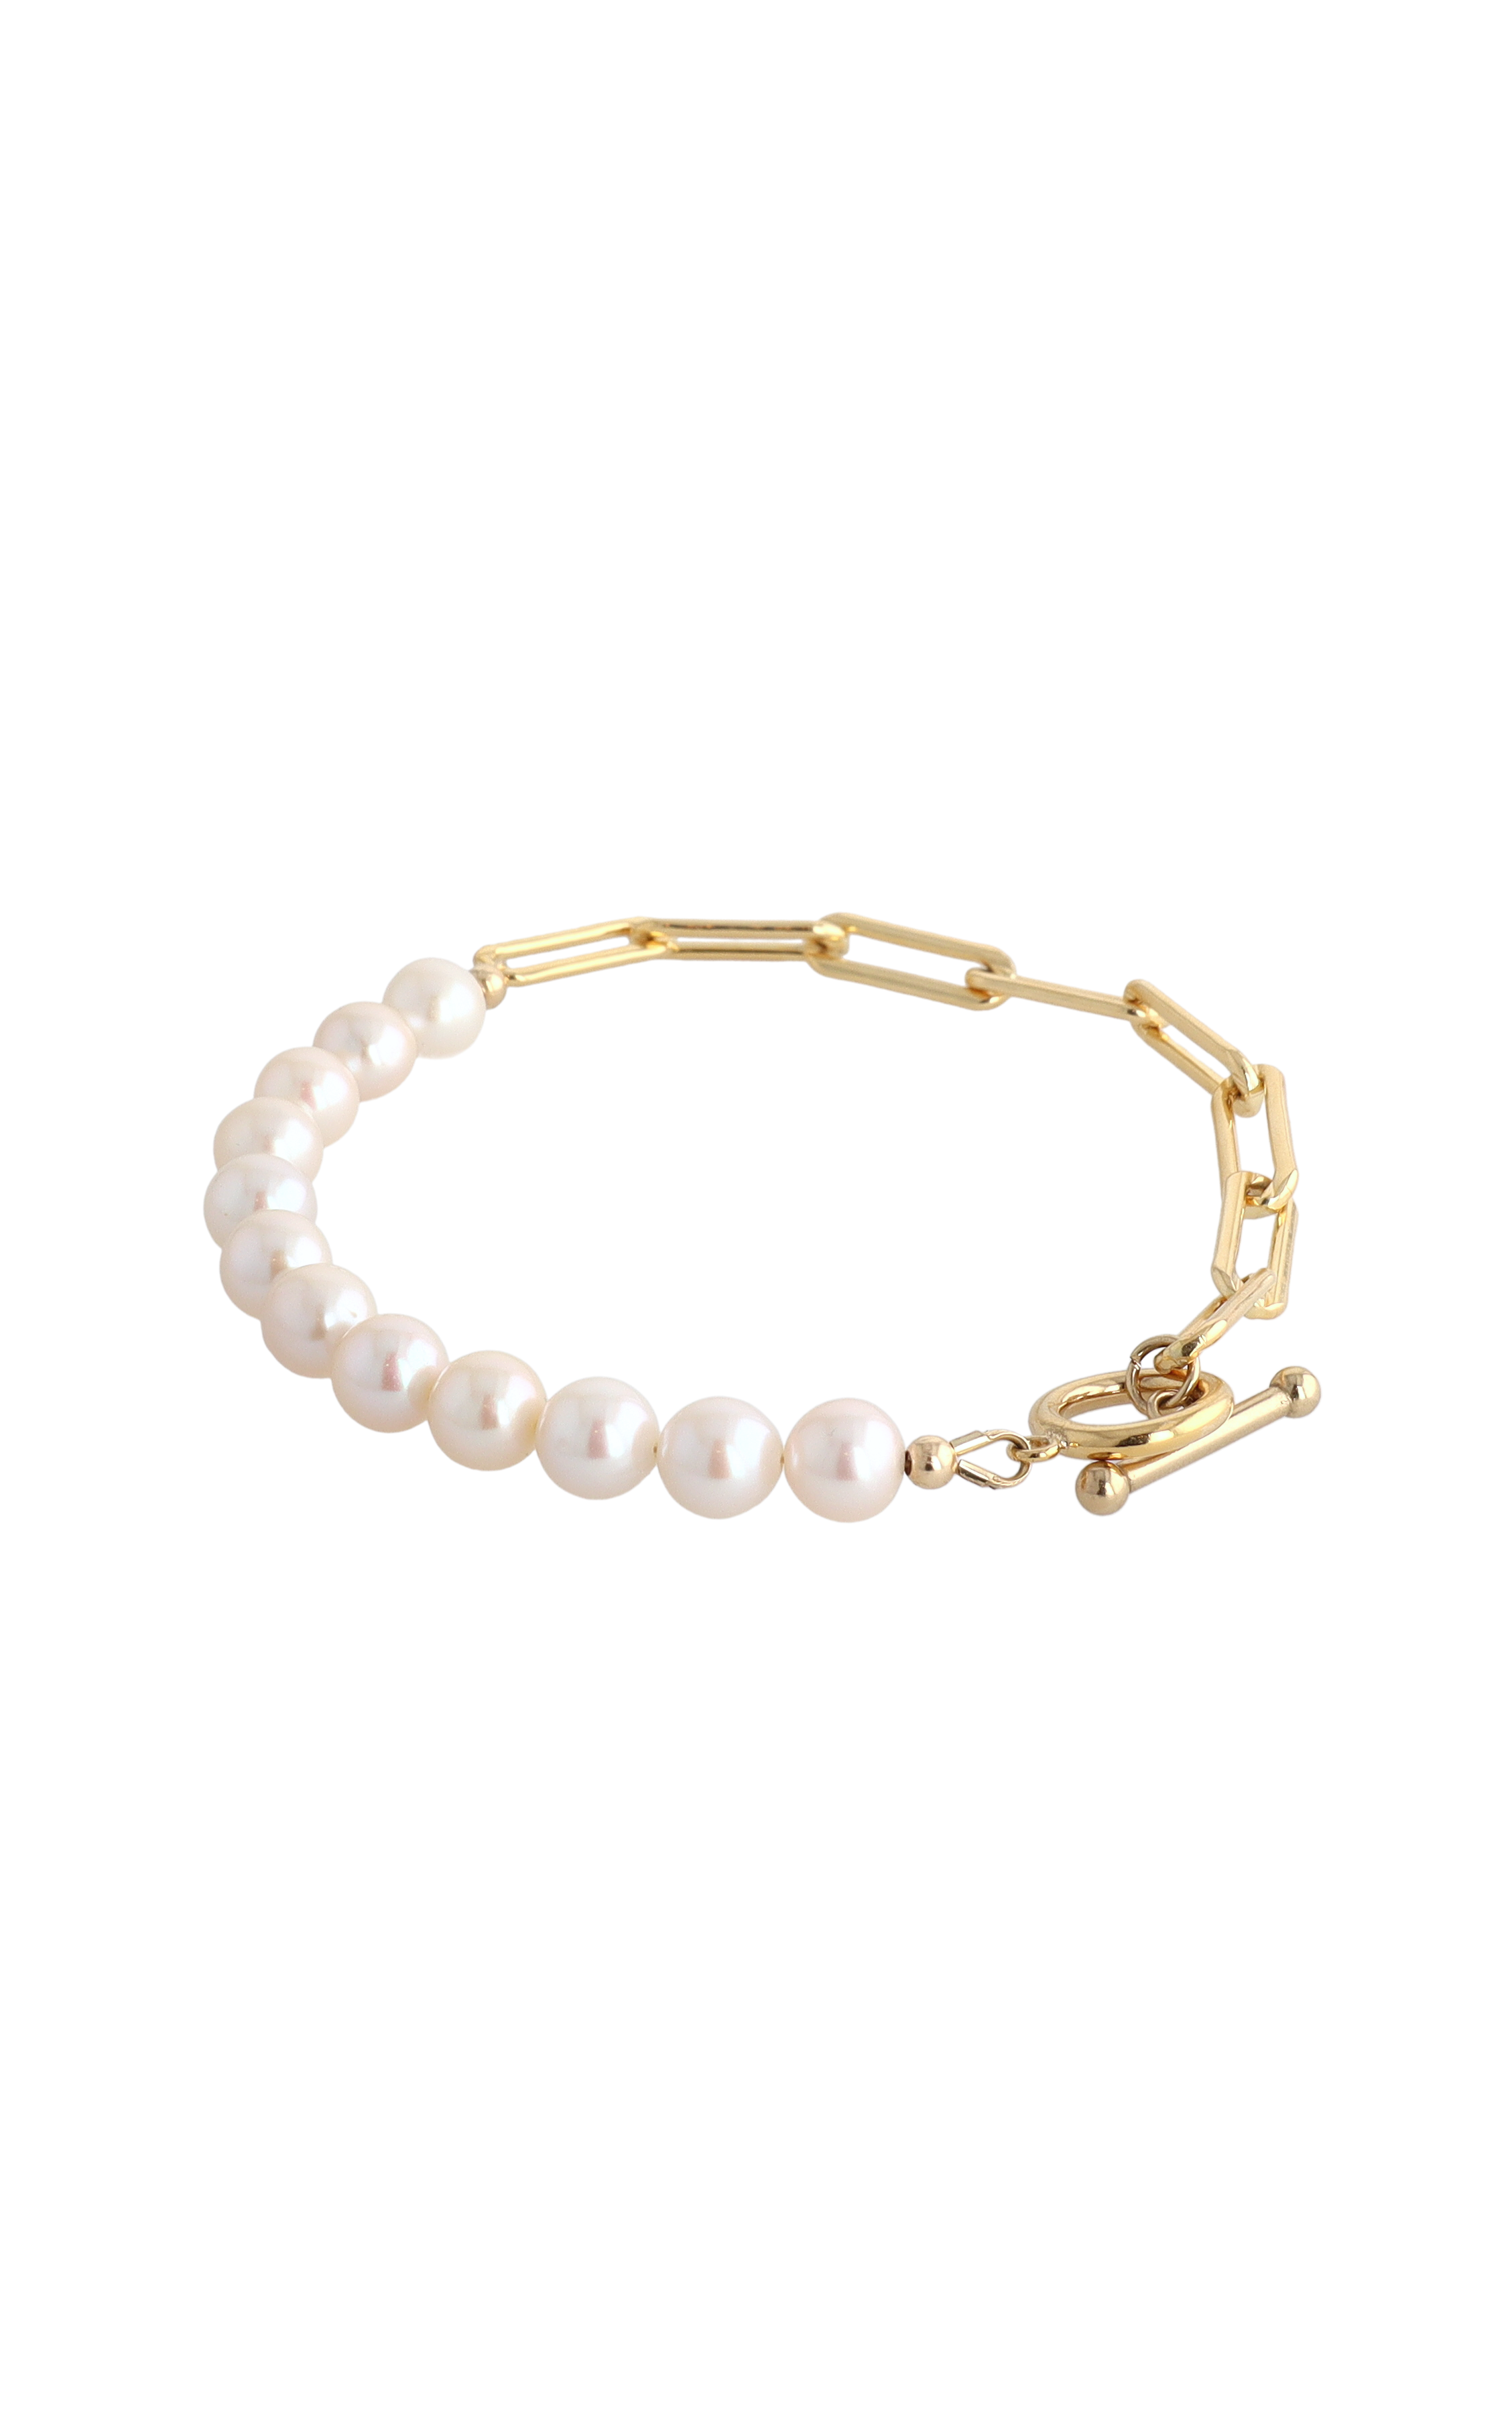 Goddess of Beauty Gold Vermeil Bracelet with Fresh Water Pearl